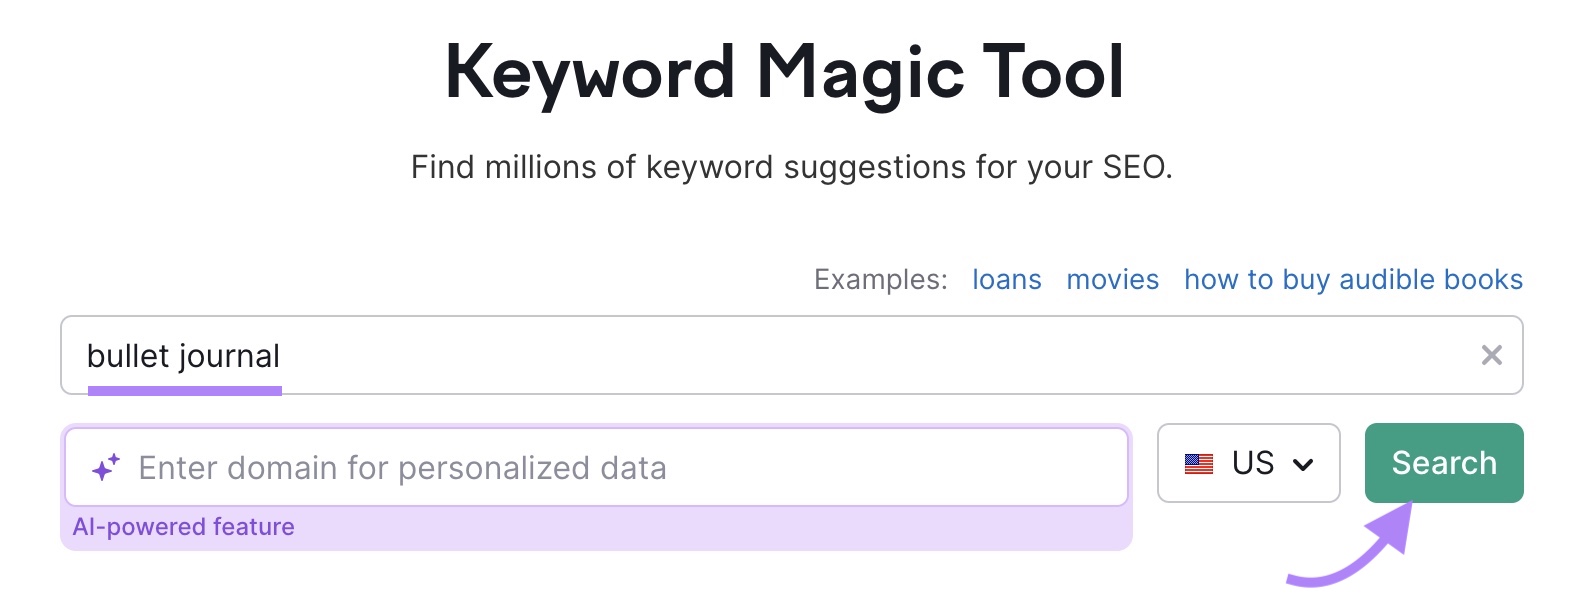 Keyword Magic Tool start-page with "bullet journal" entered and the "Search" button clicked.